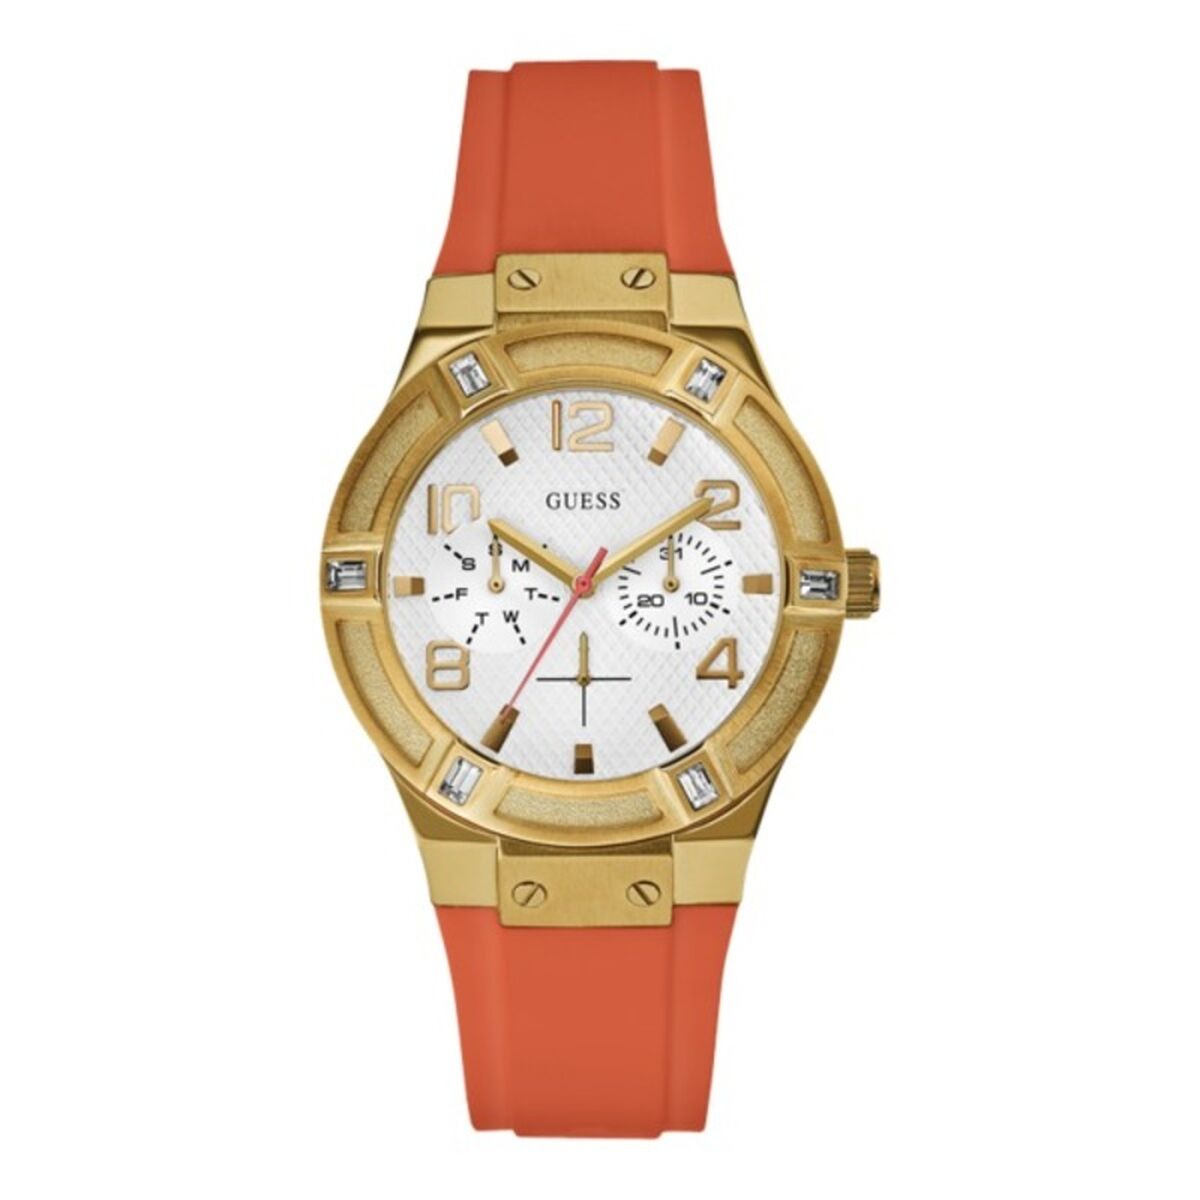 Ladies'Watch Guess W0564L2 (Ø 39 mm), Guess, Jewellery, Women, ladieswatch-guess-w0564l2-o-39-mm, : Quartz Movement, :Gold, Brand_Guess, category-reference-2570, category-reference-2635, category-reference-2662, category-reference-2682, category-reference-2995, category-reference-t-12816, category-reference-t-19662, Condition_NEW, fashion, gifts for women, original gifts, Price_100 - 200, RiotNook